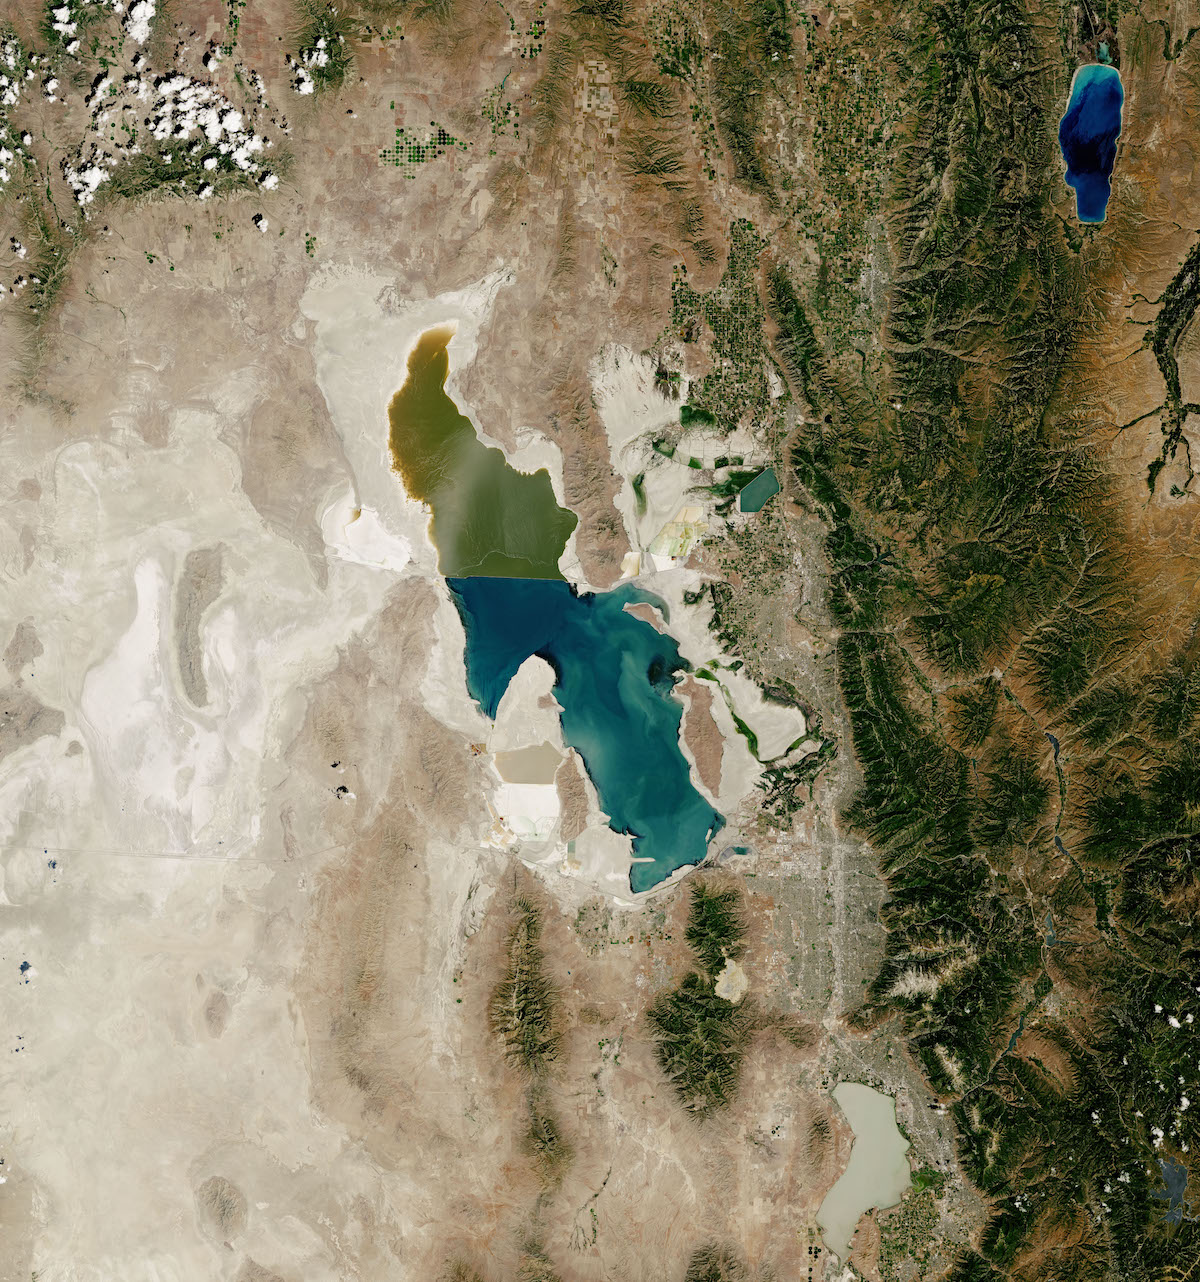 Great Salt Lake in 2022. Millions of ducks, geese, waterbirds and shorebirds use the lake's shallow waters and surrounding wetlands, especially during migration, but extended drought impacts the habitats and food supplies.<br>NASA Earth Observatory 